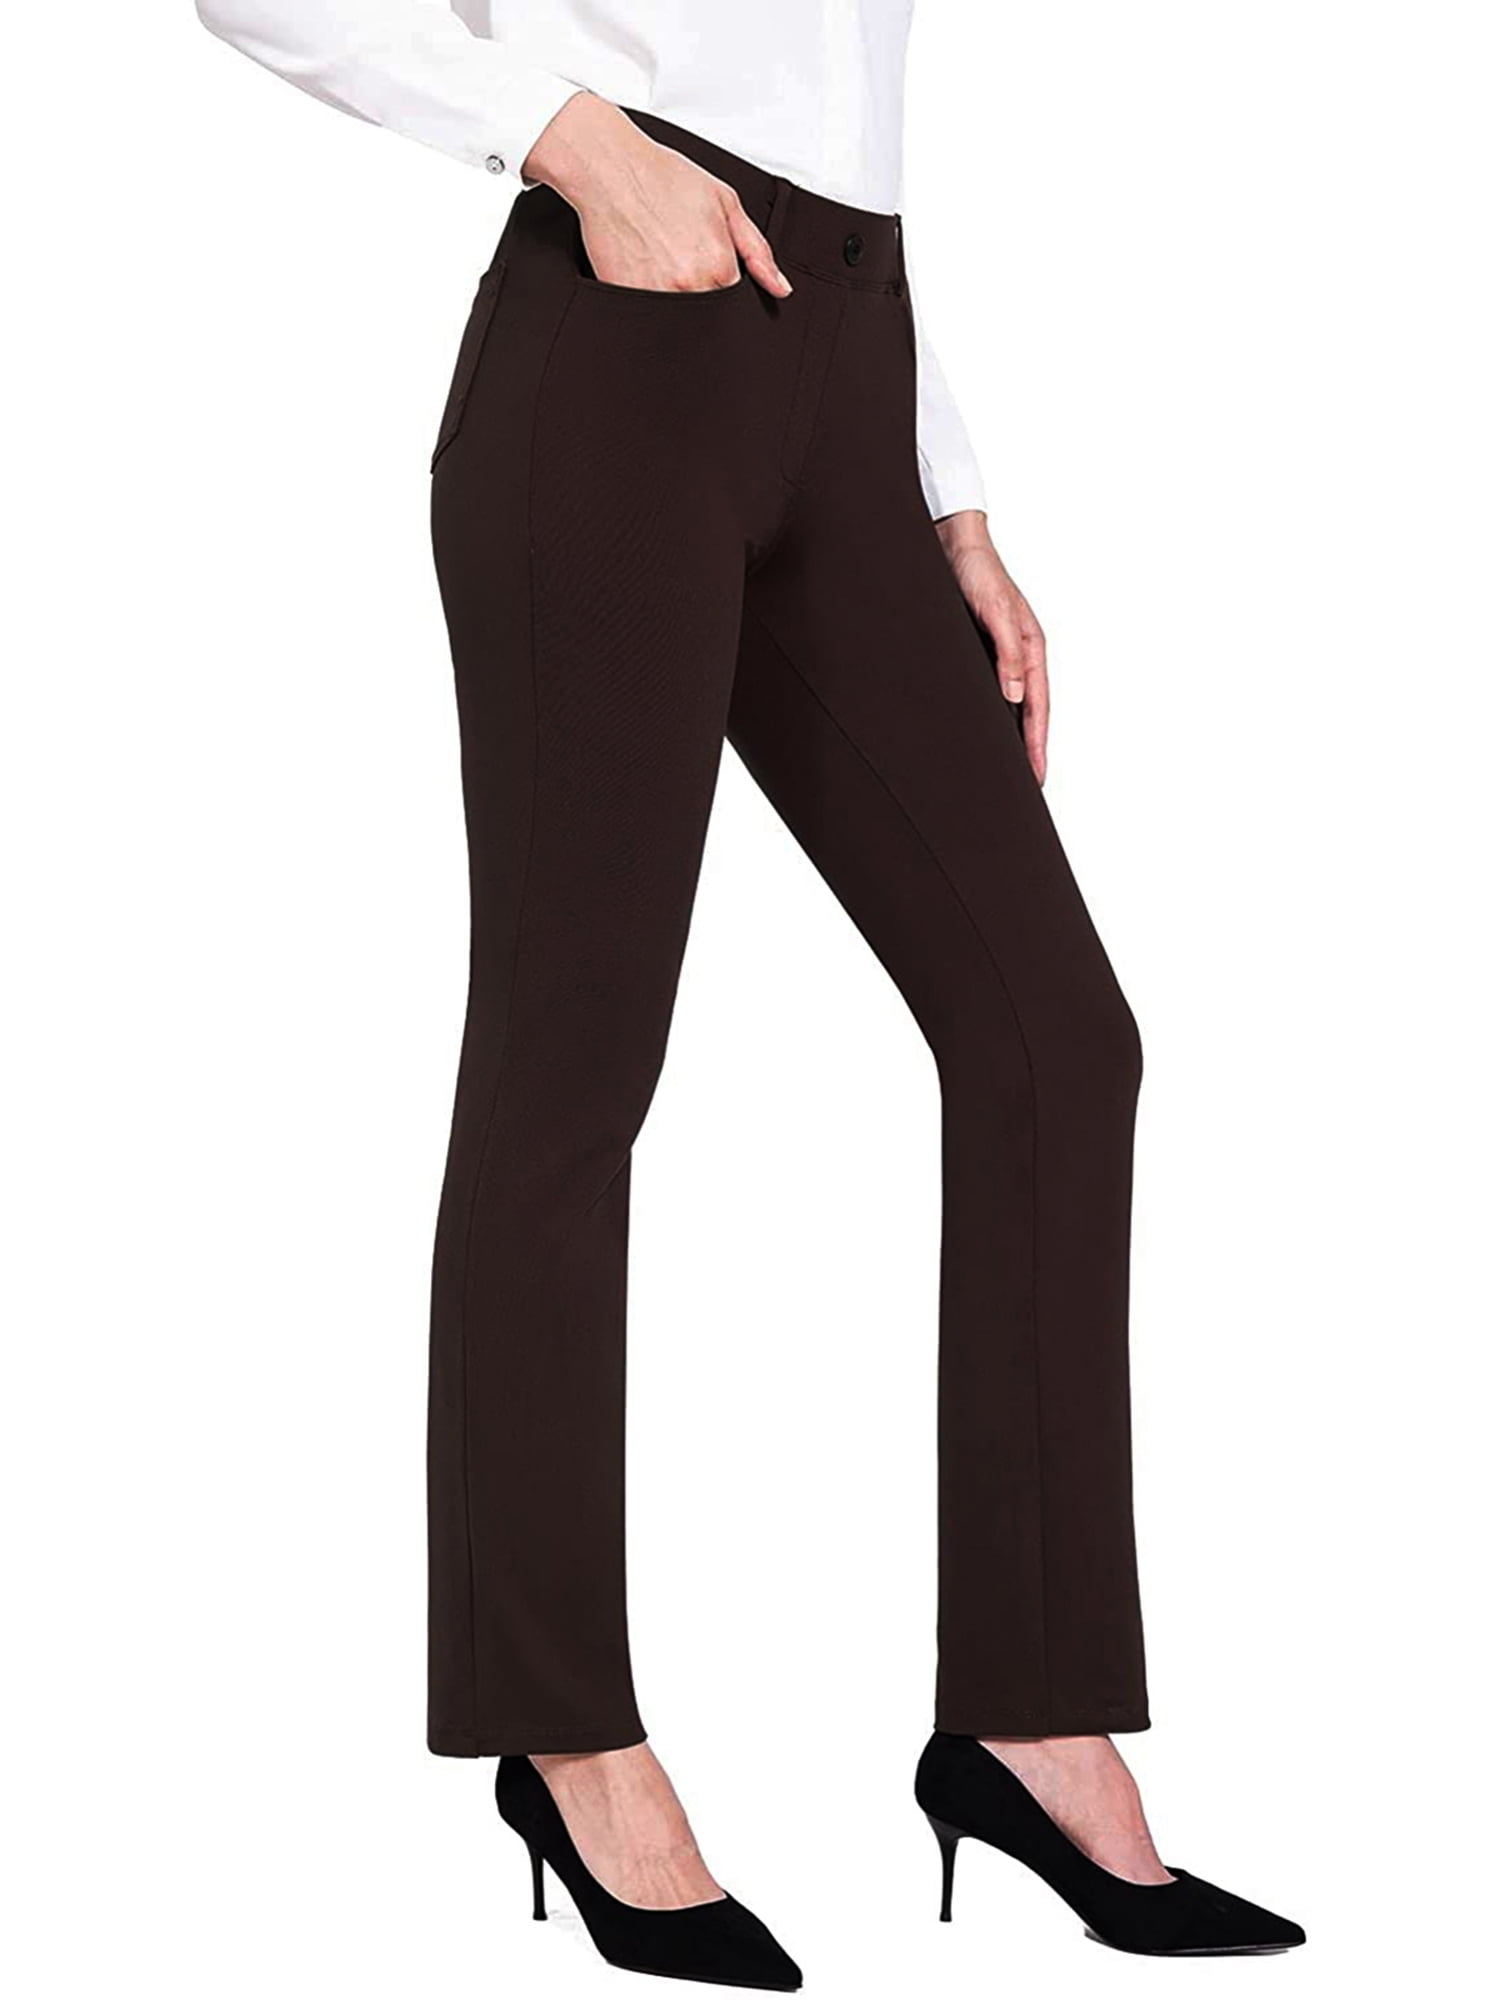 Women's Yoga Dress Pants Stretchy Work Slacks Business Casual Office  Straight Leg/Bootcut at Rs 150/piece, Mens T Shirt in Surat